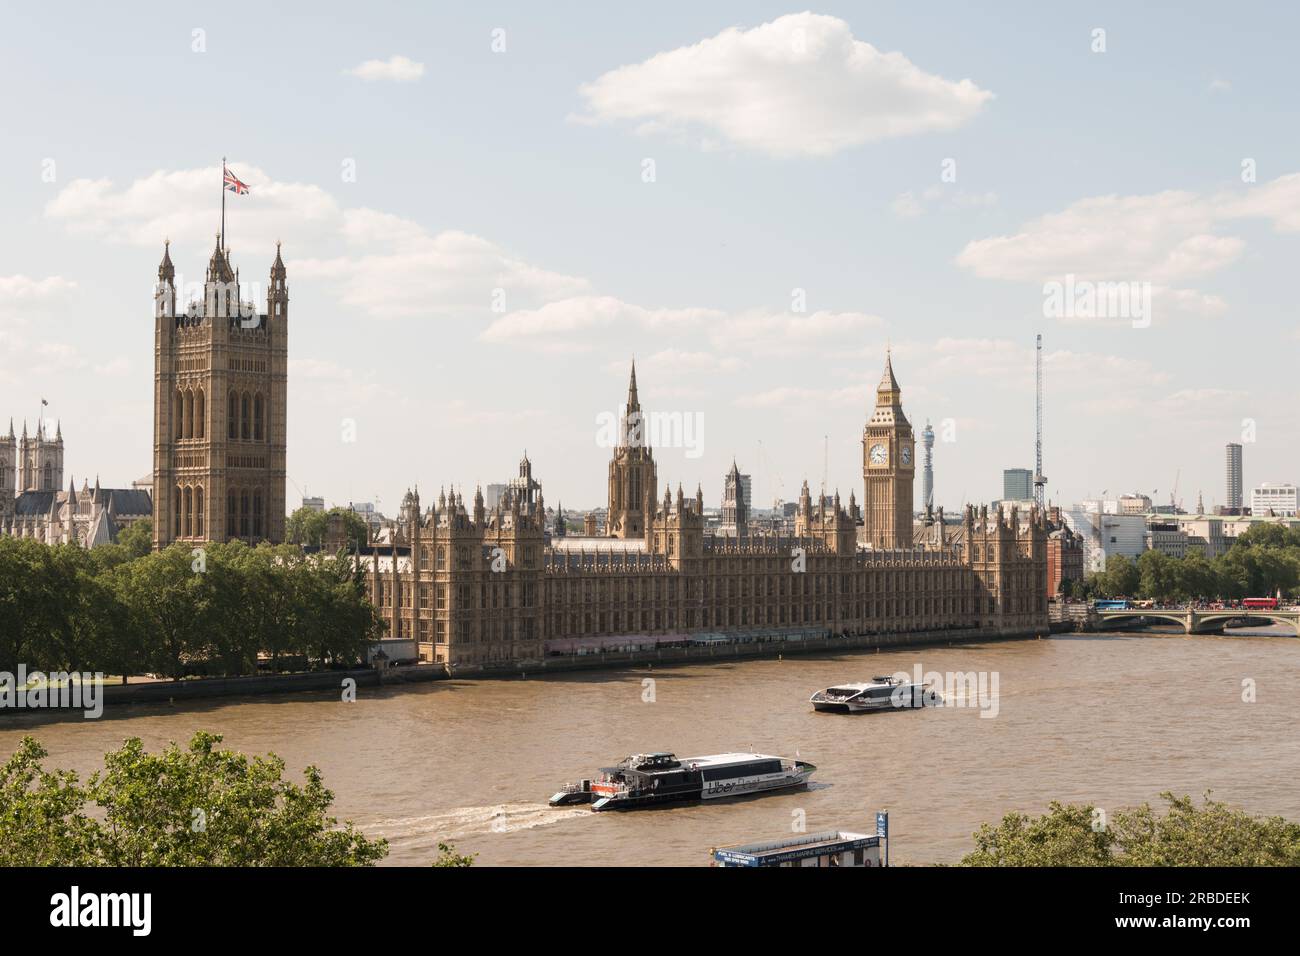 Uber Boats passing the Houses of Parliament and Big Ben on the River Thames, London, England, U.K. Stock Photo